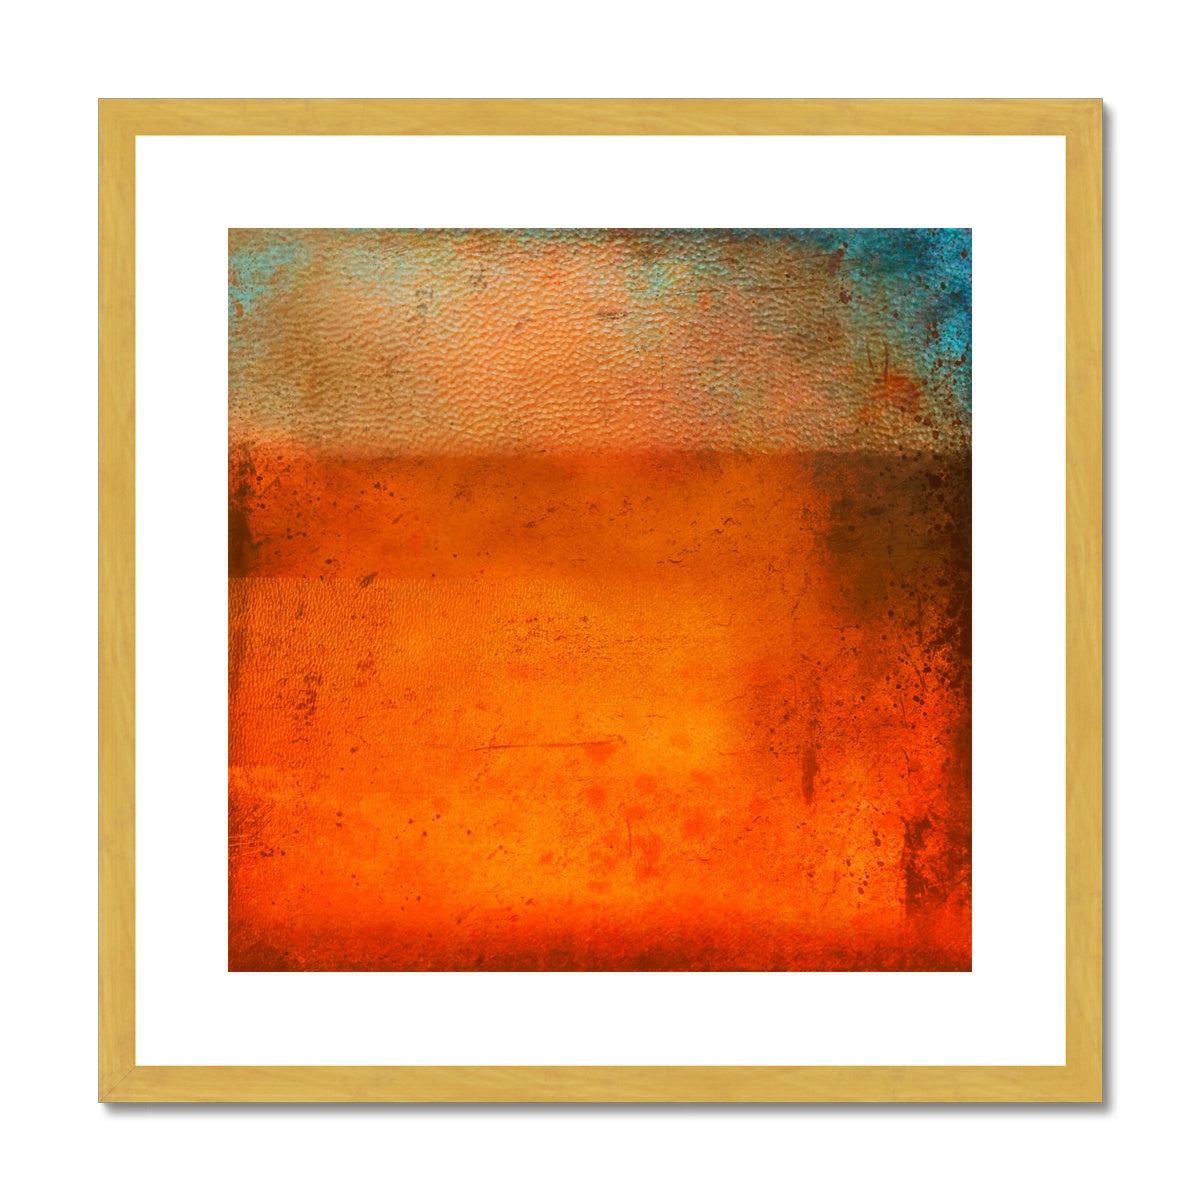 Sunset Horizon Abstract Painting | Antique Framed & Mounted Prints From Scotland-Antique Framed & Mounted Prints-Abstract & Impressionistic Art Gallery-20"x20"-Gold Frame-Paintings, Prints, Homeware, Art Gifts From Scotland By Scottish Artist Kevin Hunter